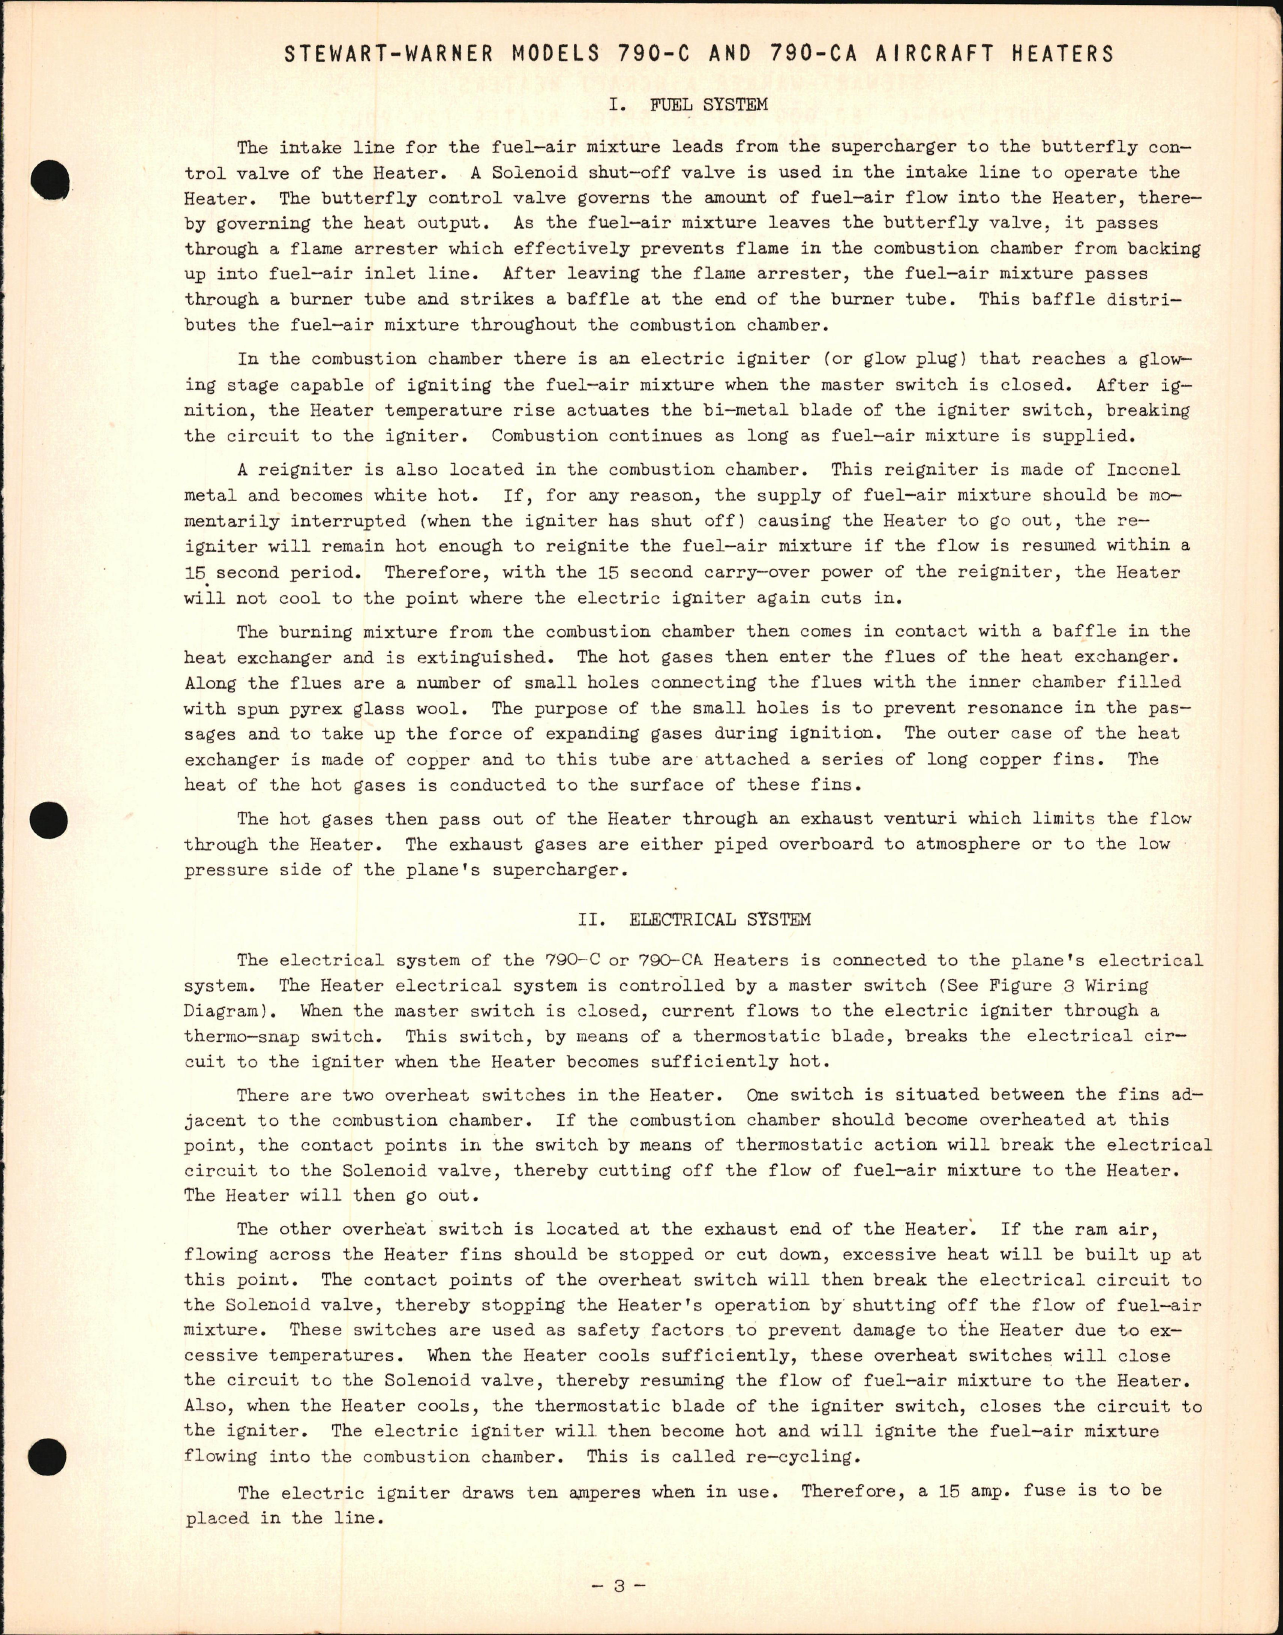 Sample page 7 from AirCorps Library document: Service School Lectures - Heat & Vent